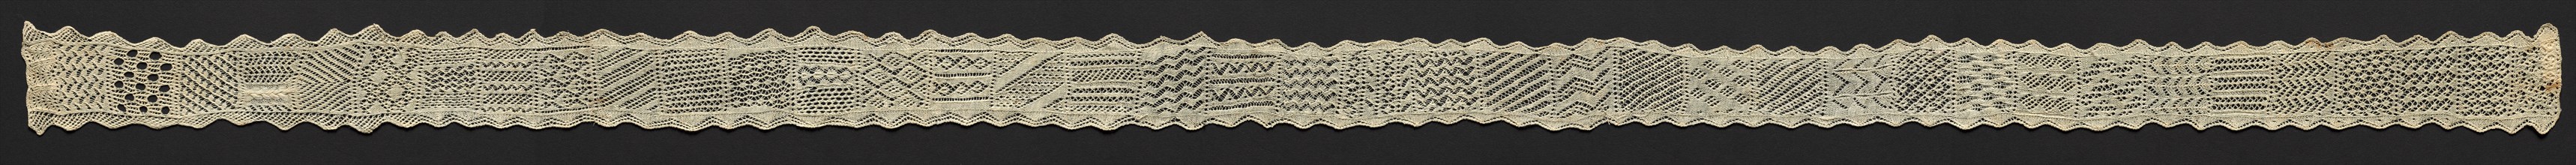 Knitted Lace Sampler, 19th century. Creator: Unknown.